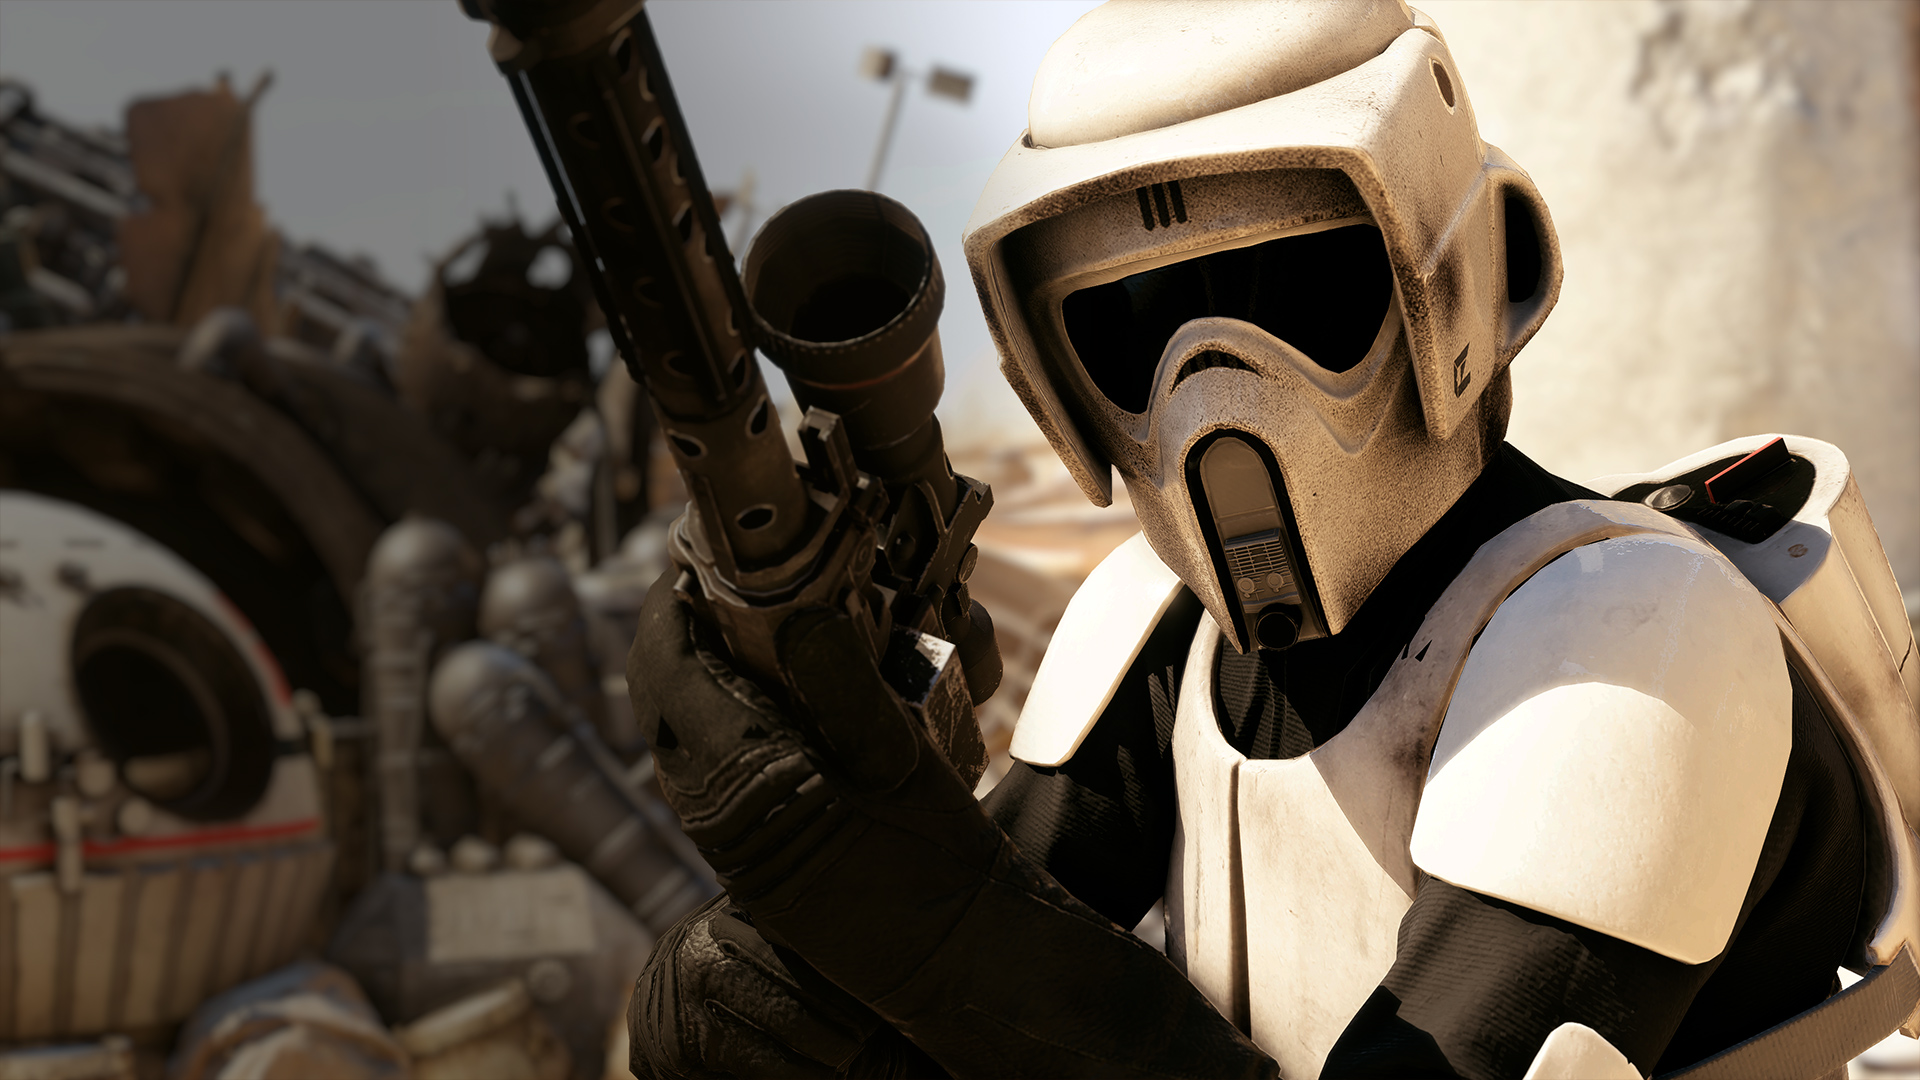 star wars battlefront 2 pc nvidia manage 3d settings